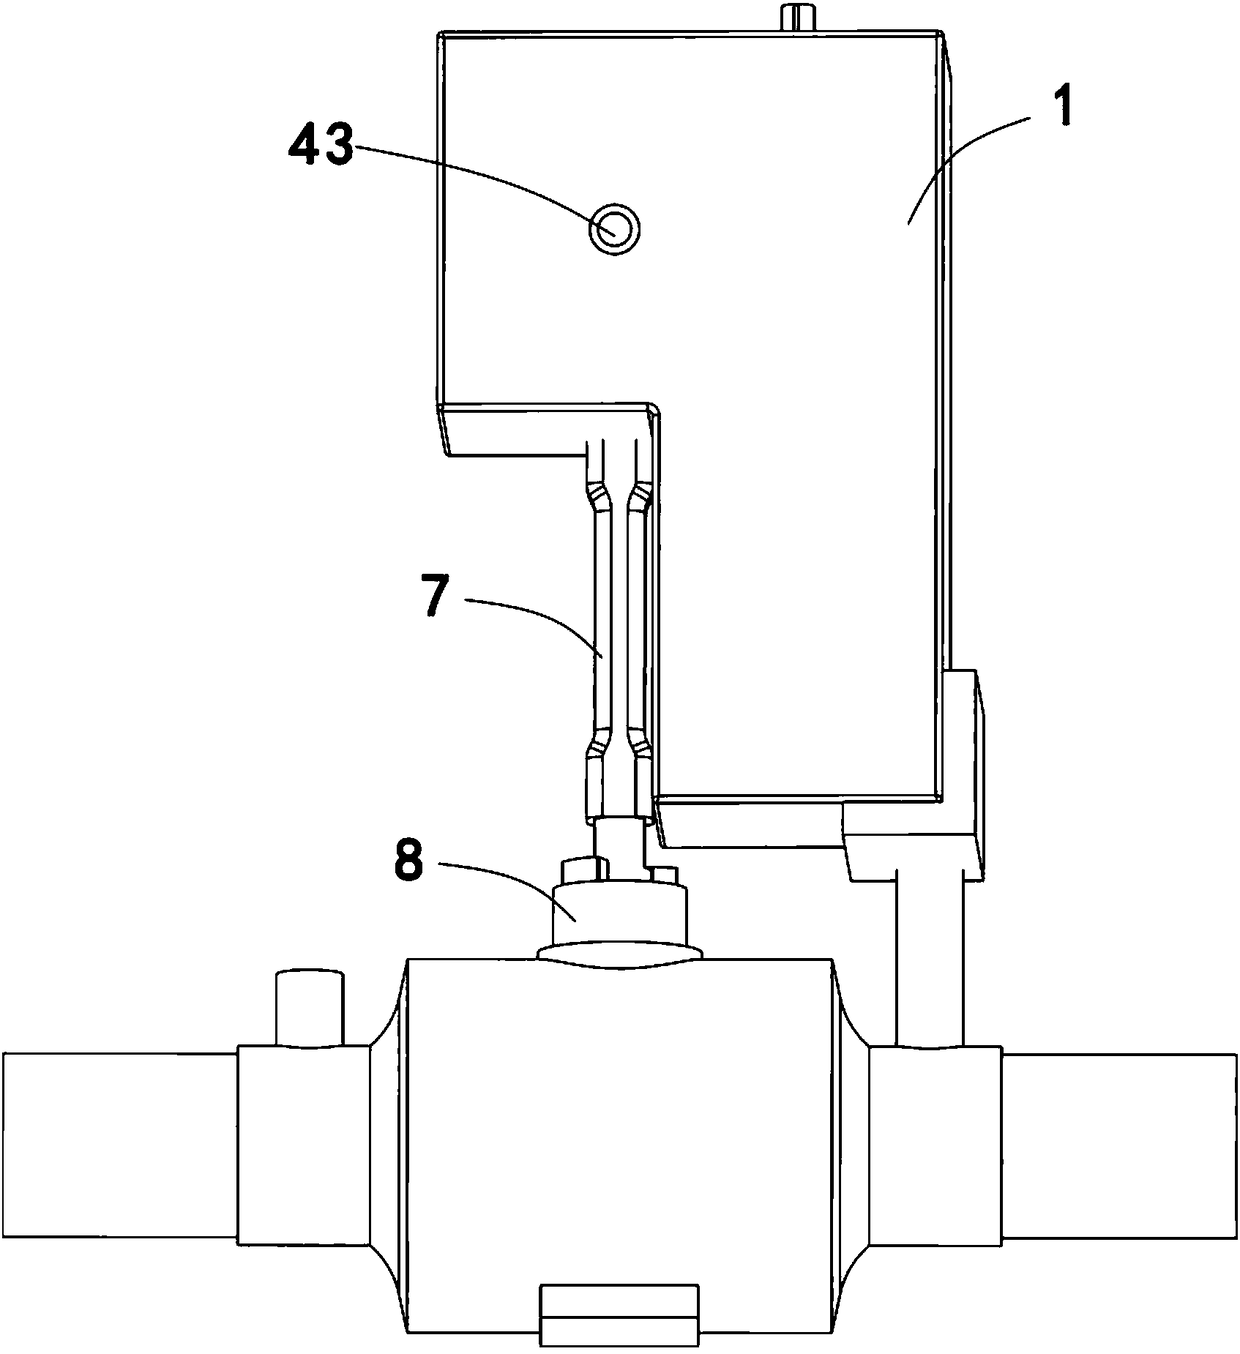 Manual/electric integrated PE ball valve opening and closing device